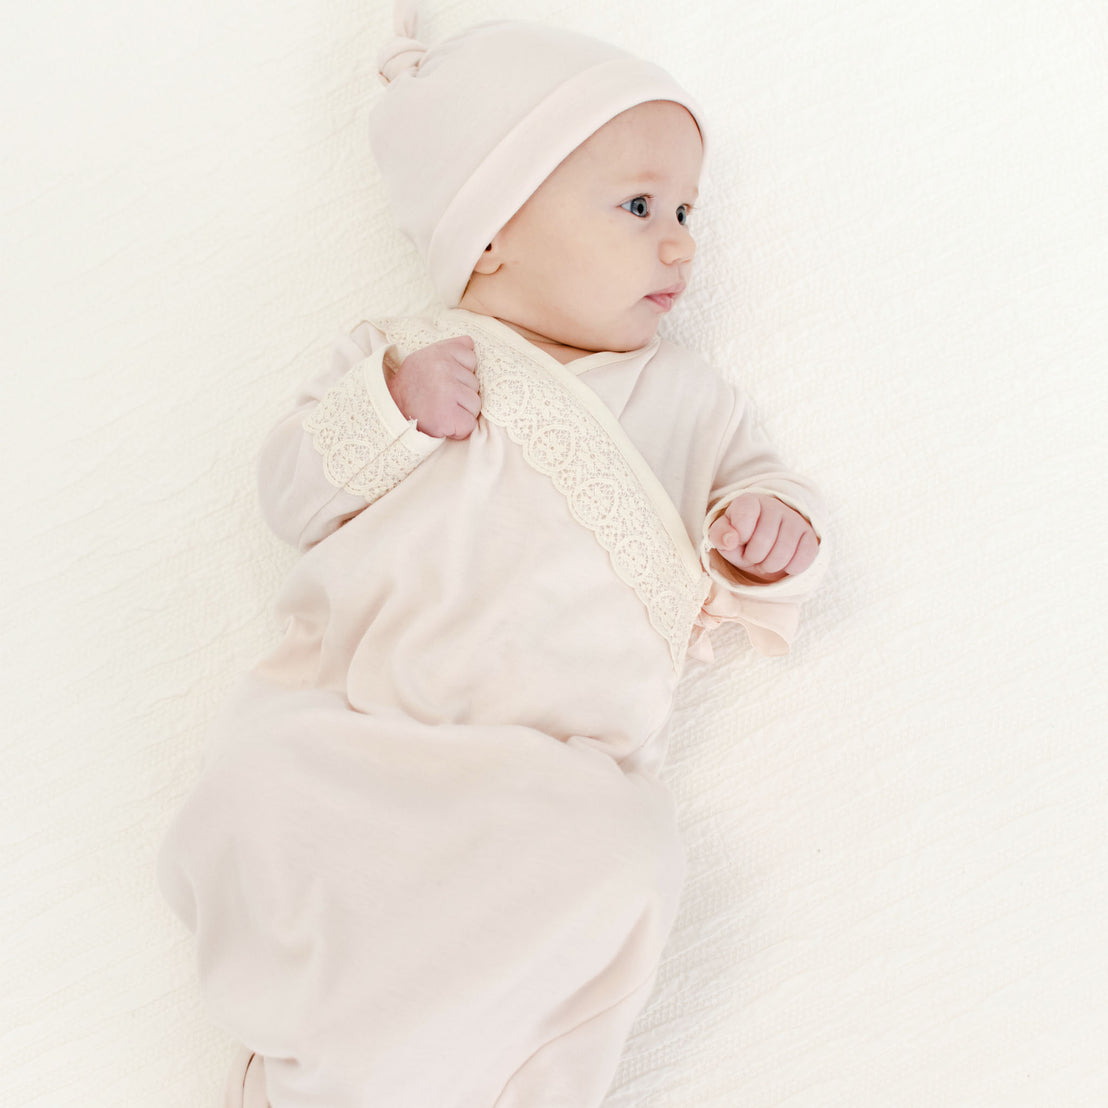 A newborn baby wearing the Evelyn Knot Gown and matching Ava Pima Knot Cap, looking off to the side while lying on a cream-colored background. The outfit is adorned with delicate lace detailing.